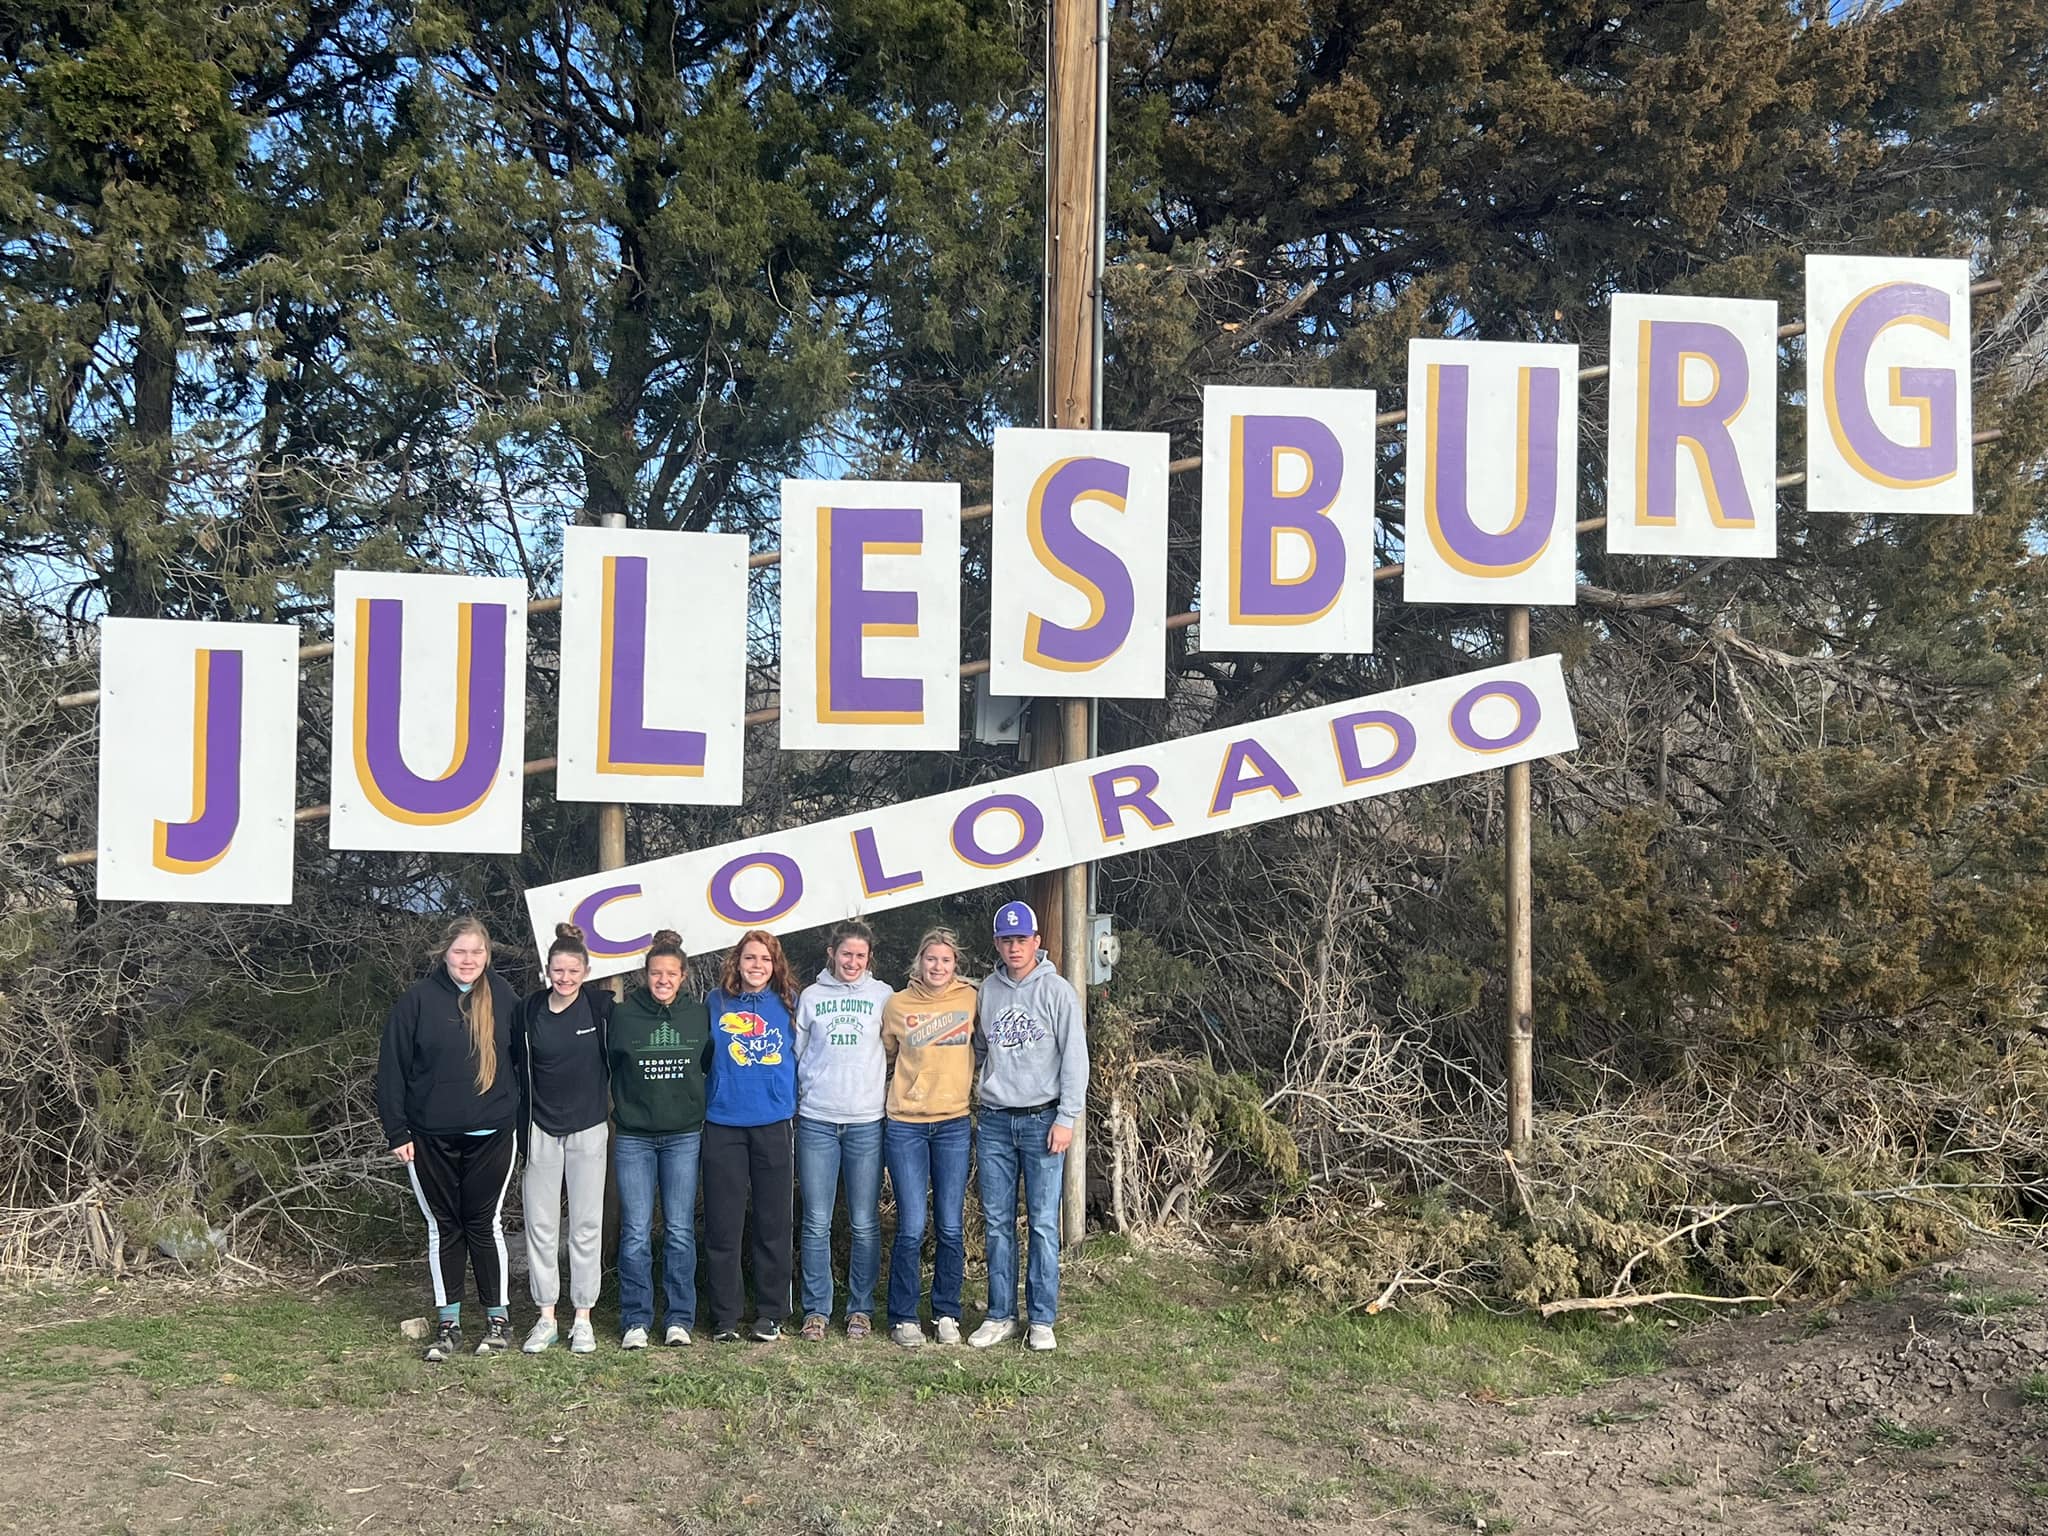 julesburg students outdoors